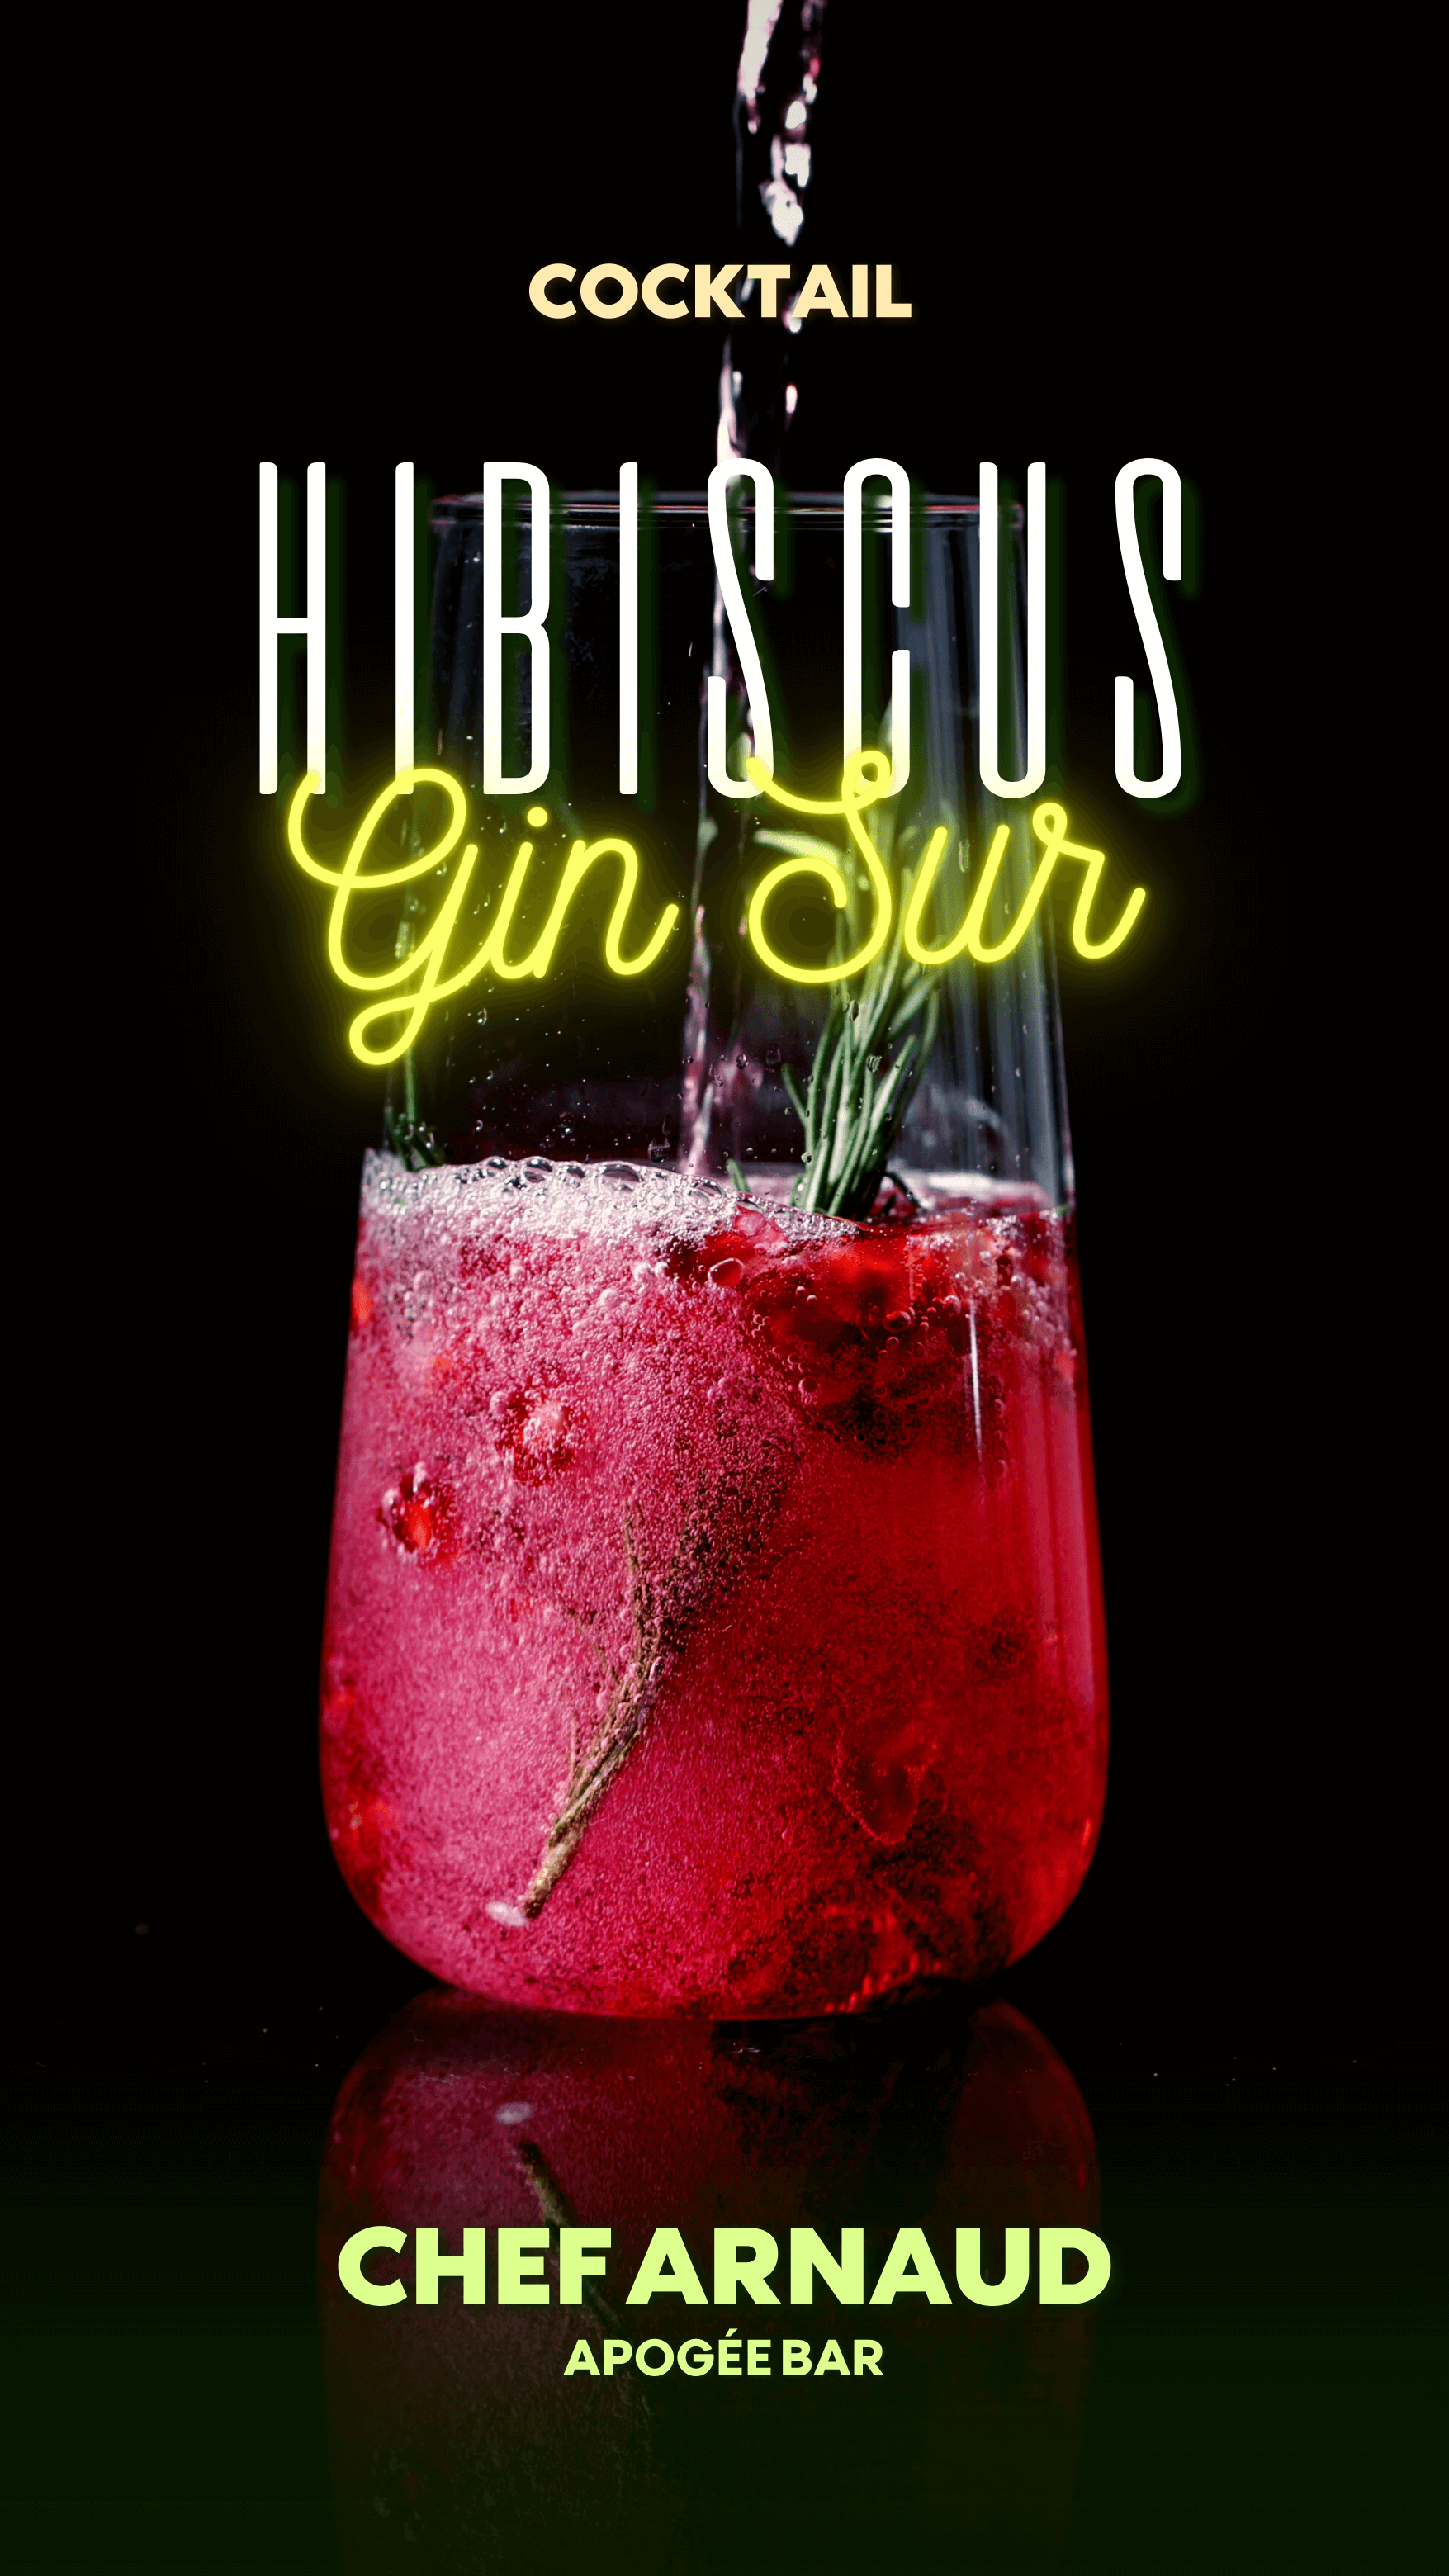 Cocktail Hibiscus Gin Sour